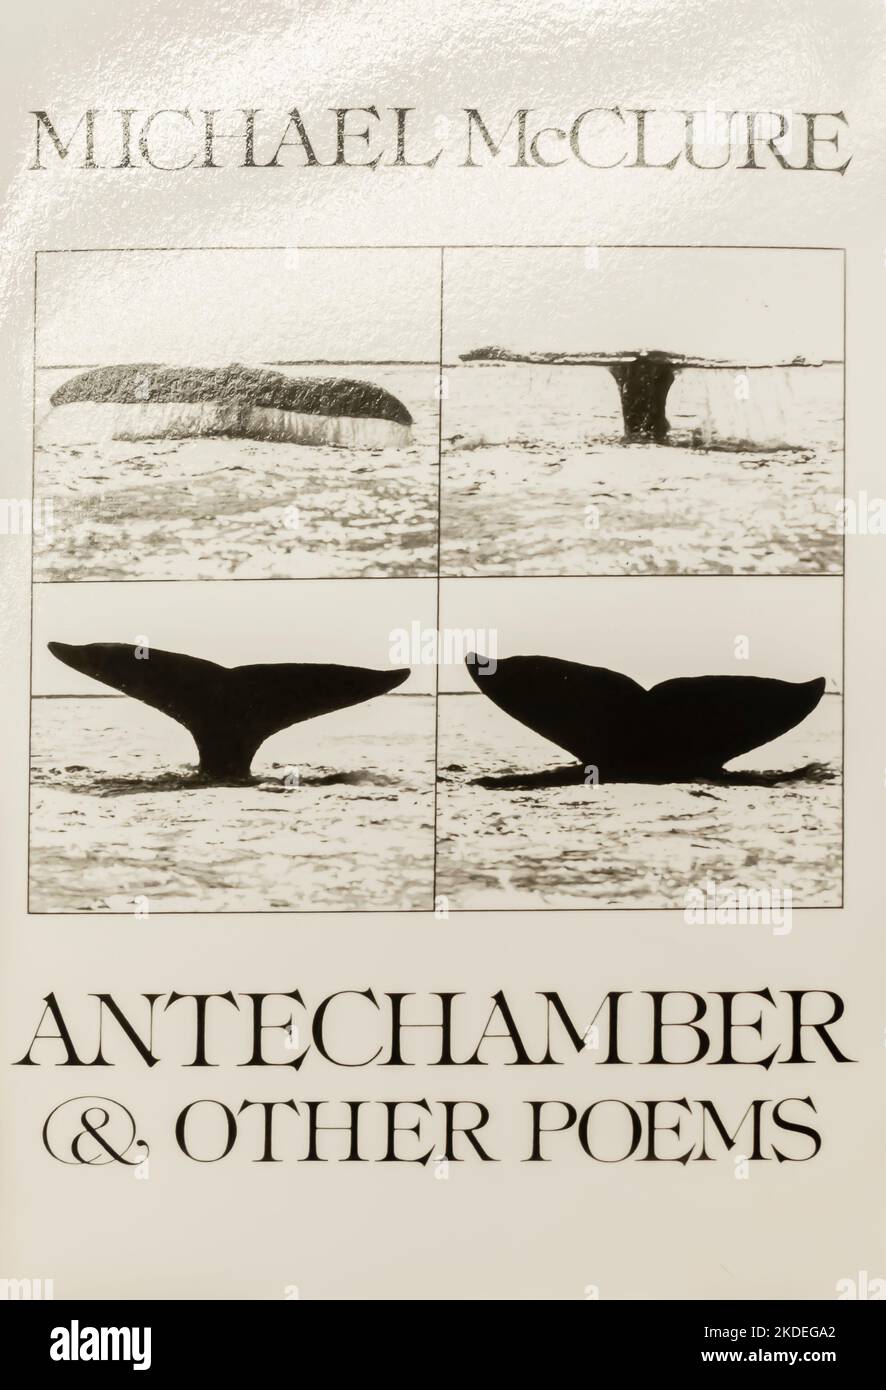 Antechamber, and other poems Book by Michael McClure. 1978 Stock Photo